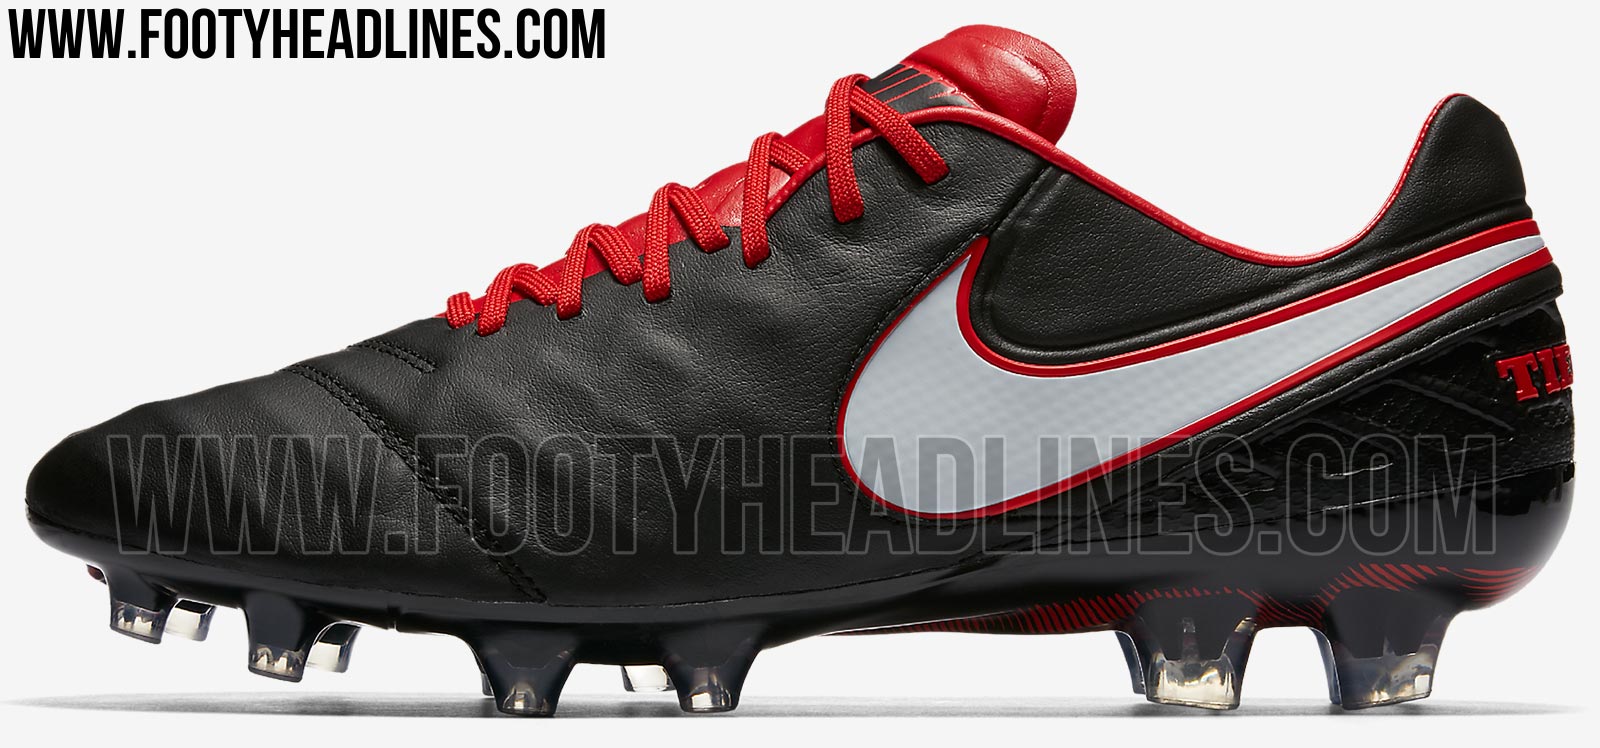 Stunning Black / Red Nike Tiempo Legend VI 2017 Boots Released Footy